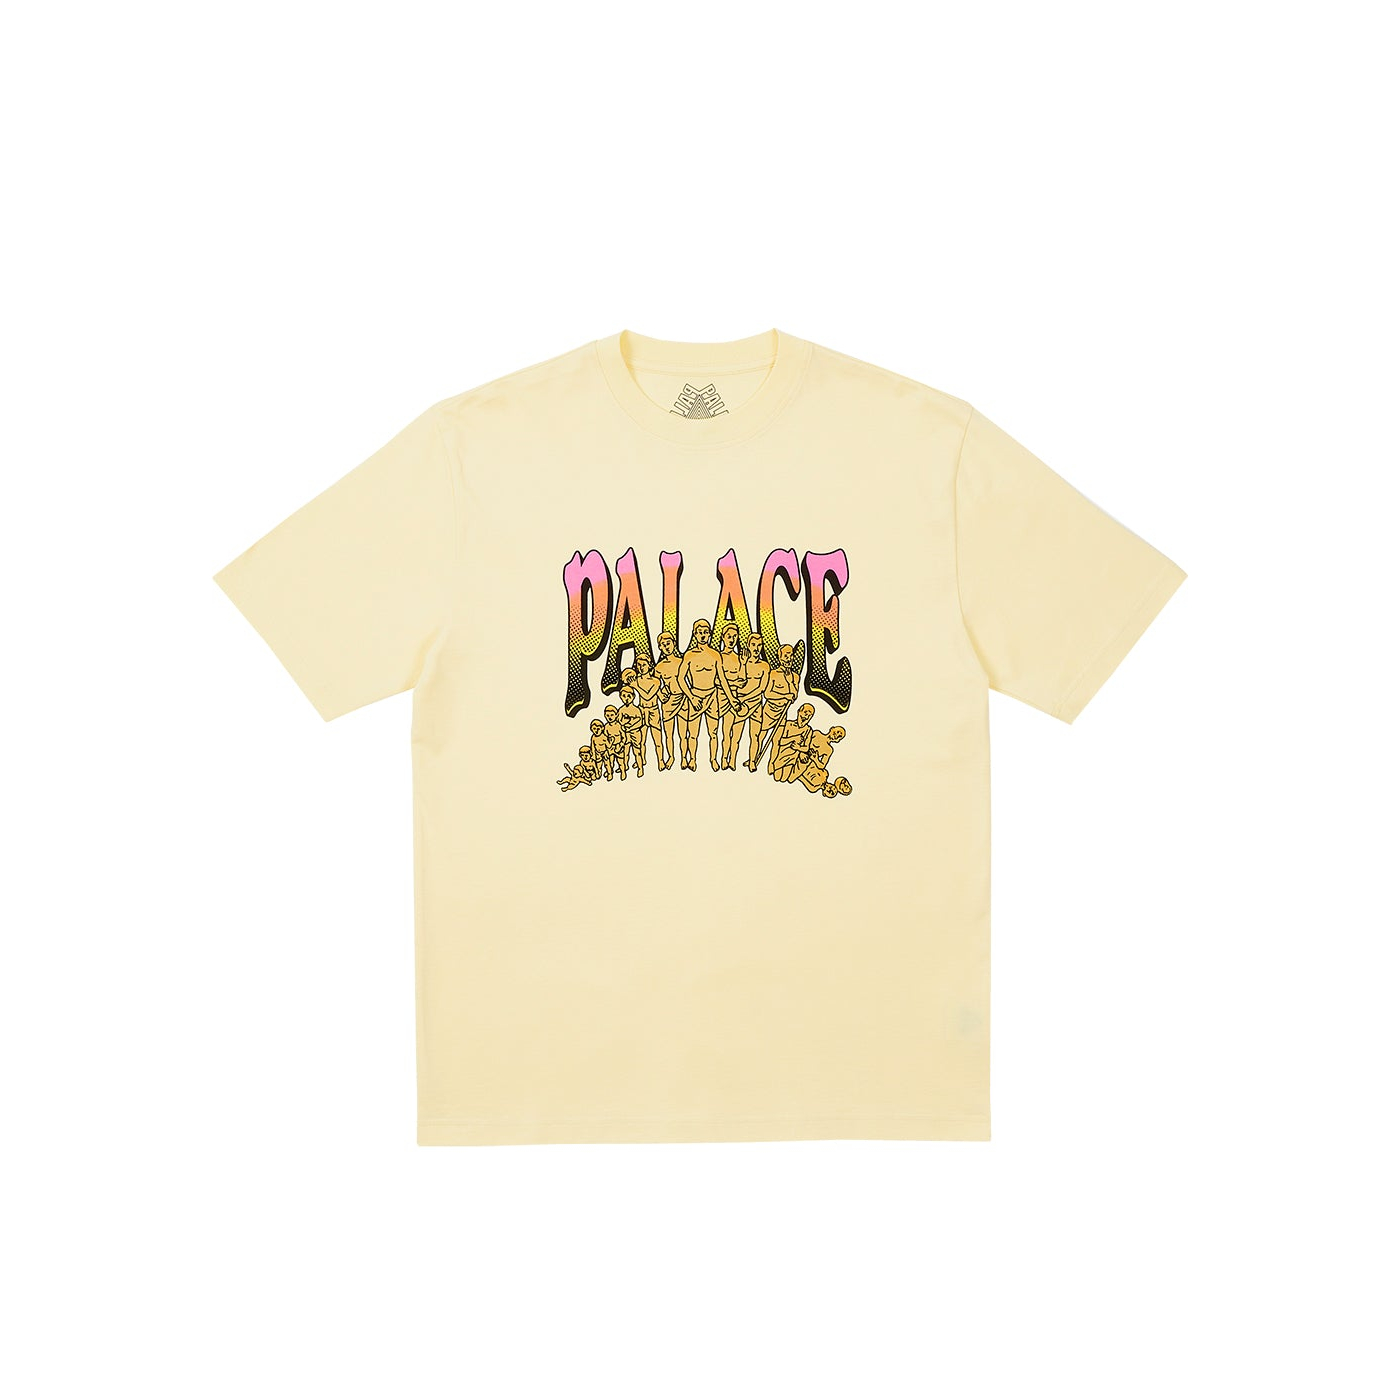 Thumbnail FROM THE BEGINNING TO THE END T-SHIRT MELLOW YELLOW one color